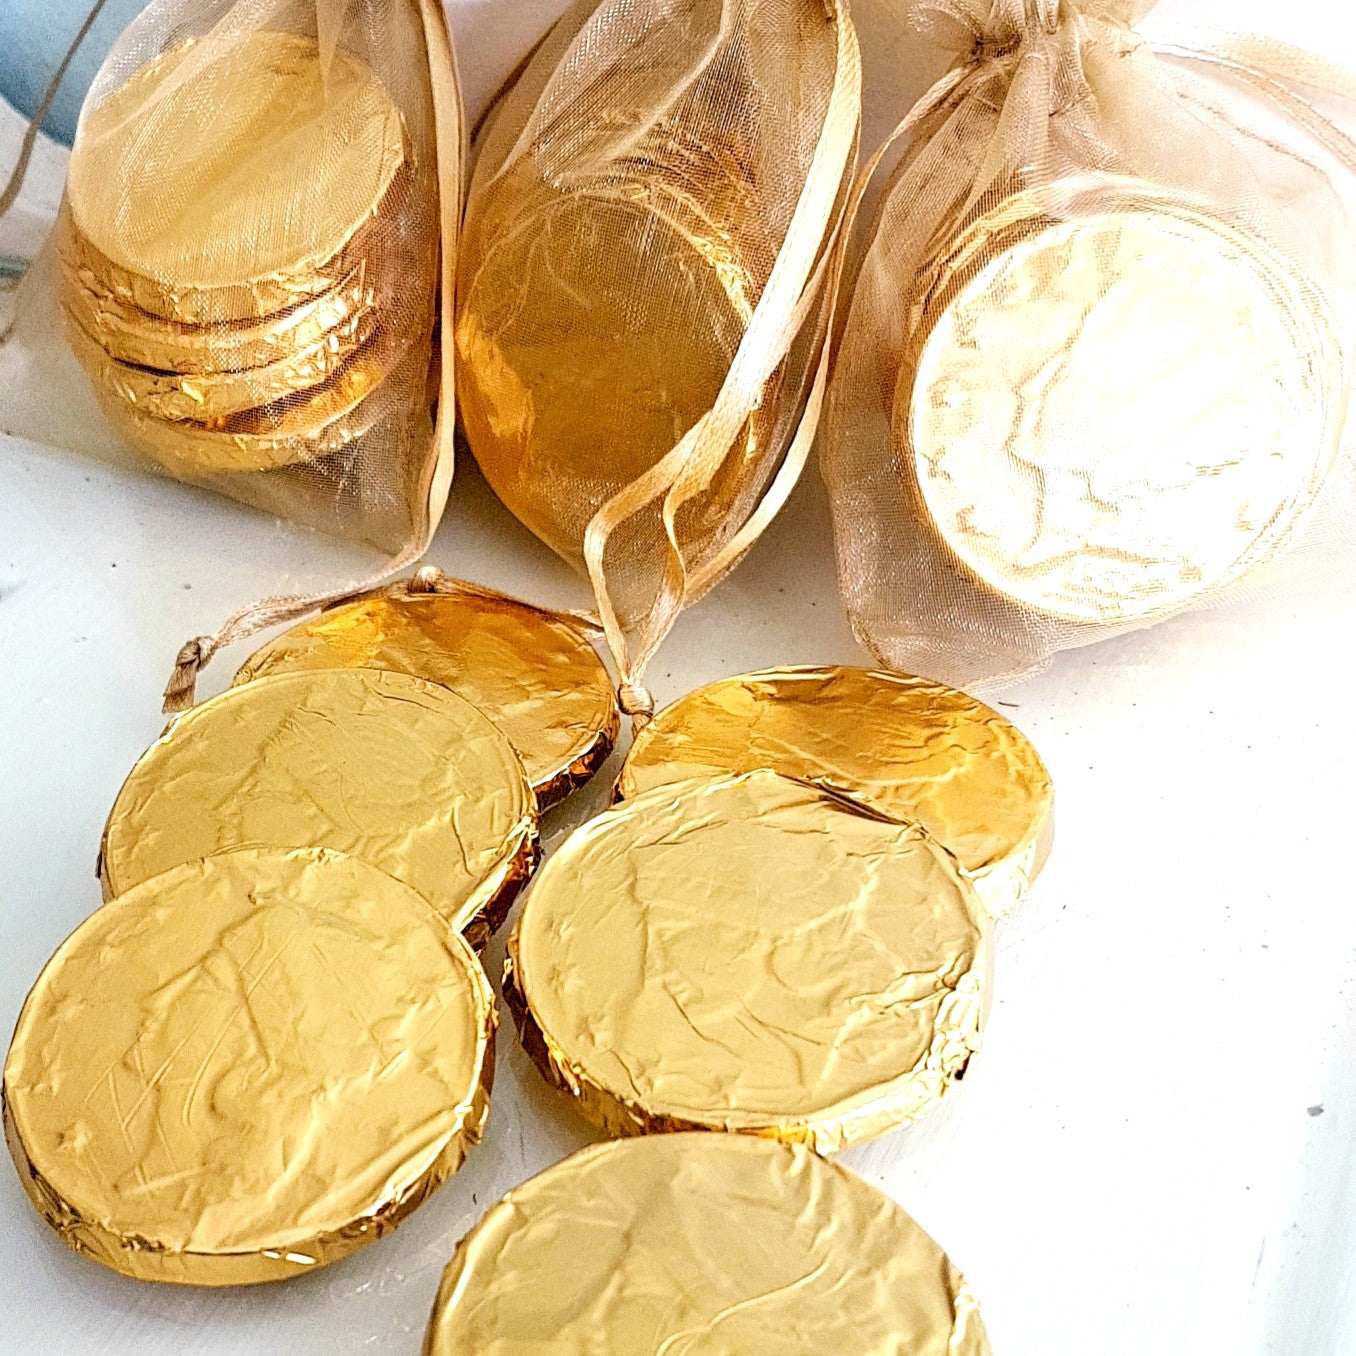 Bag of 12 Foil Wrapped Chocolate Coins